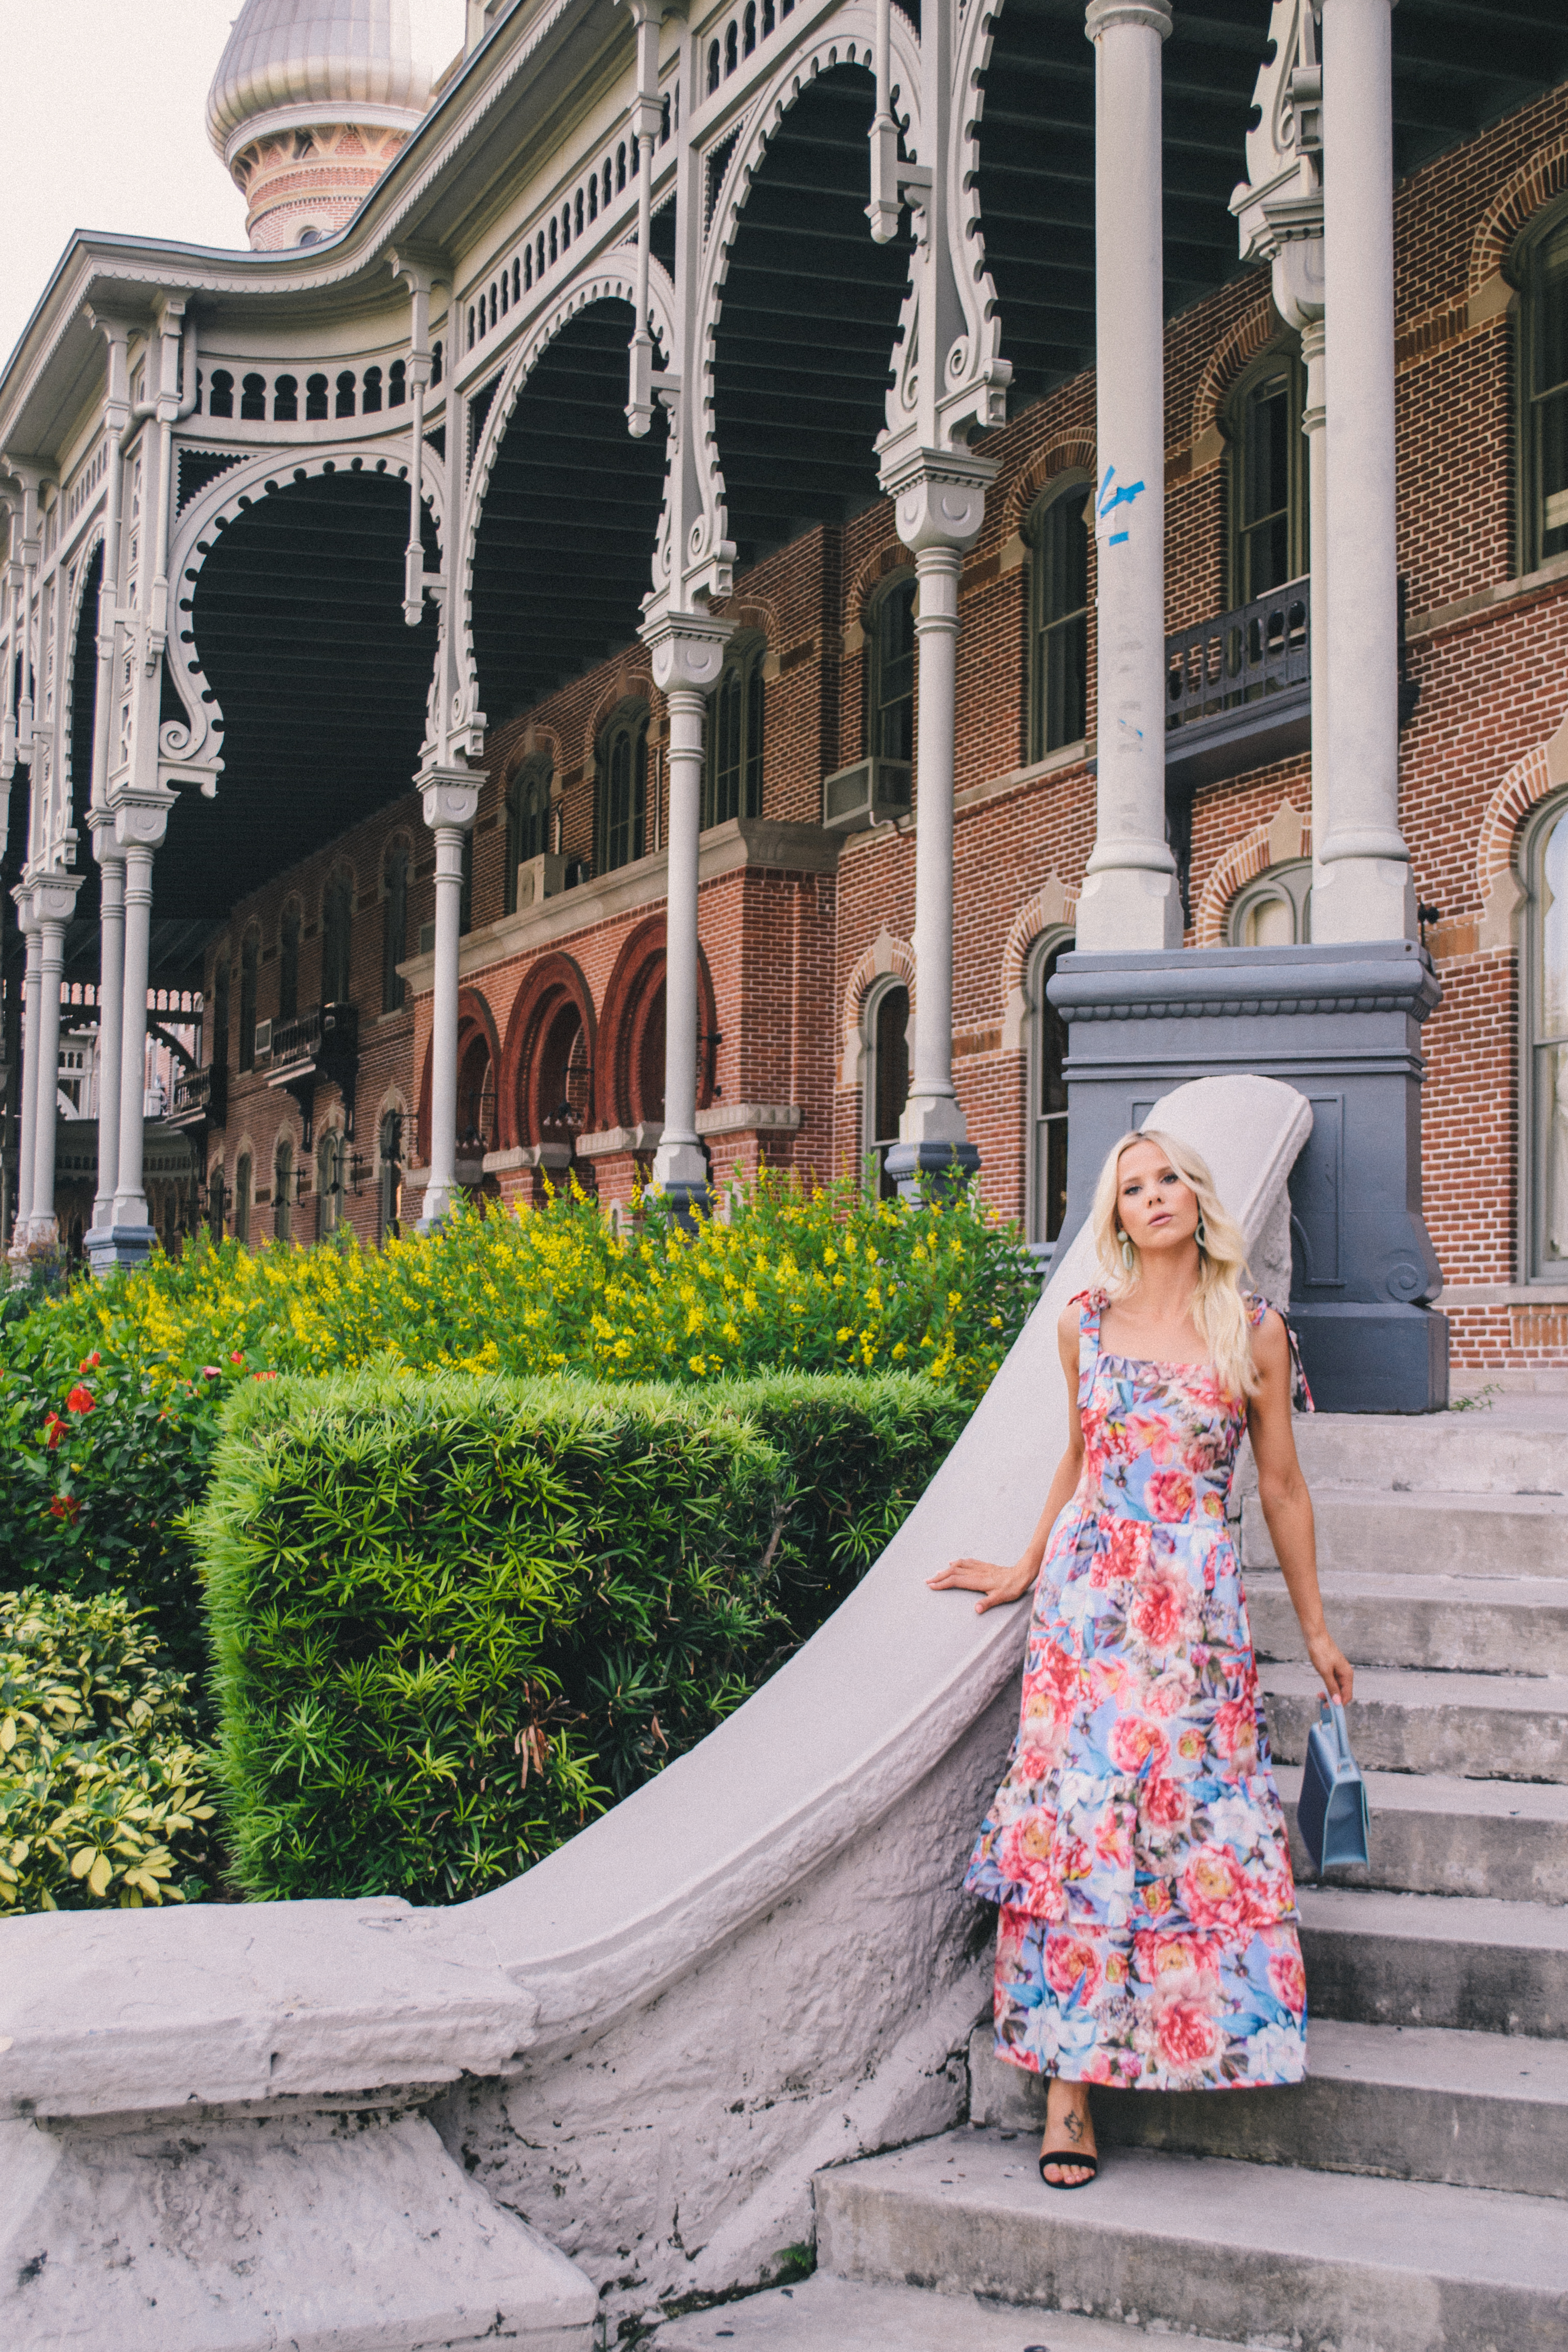 The perfect floral middi dress for a tropical destination vacation on Glam Life Living #glamlifeliving #vacationstyle #vacationoutfit 